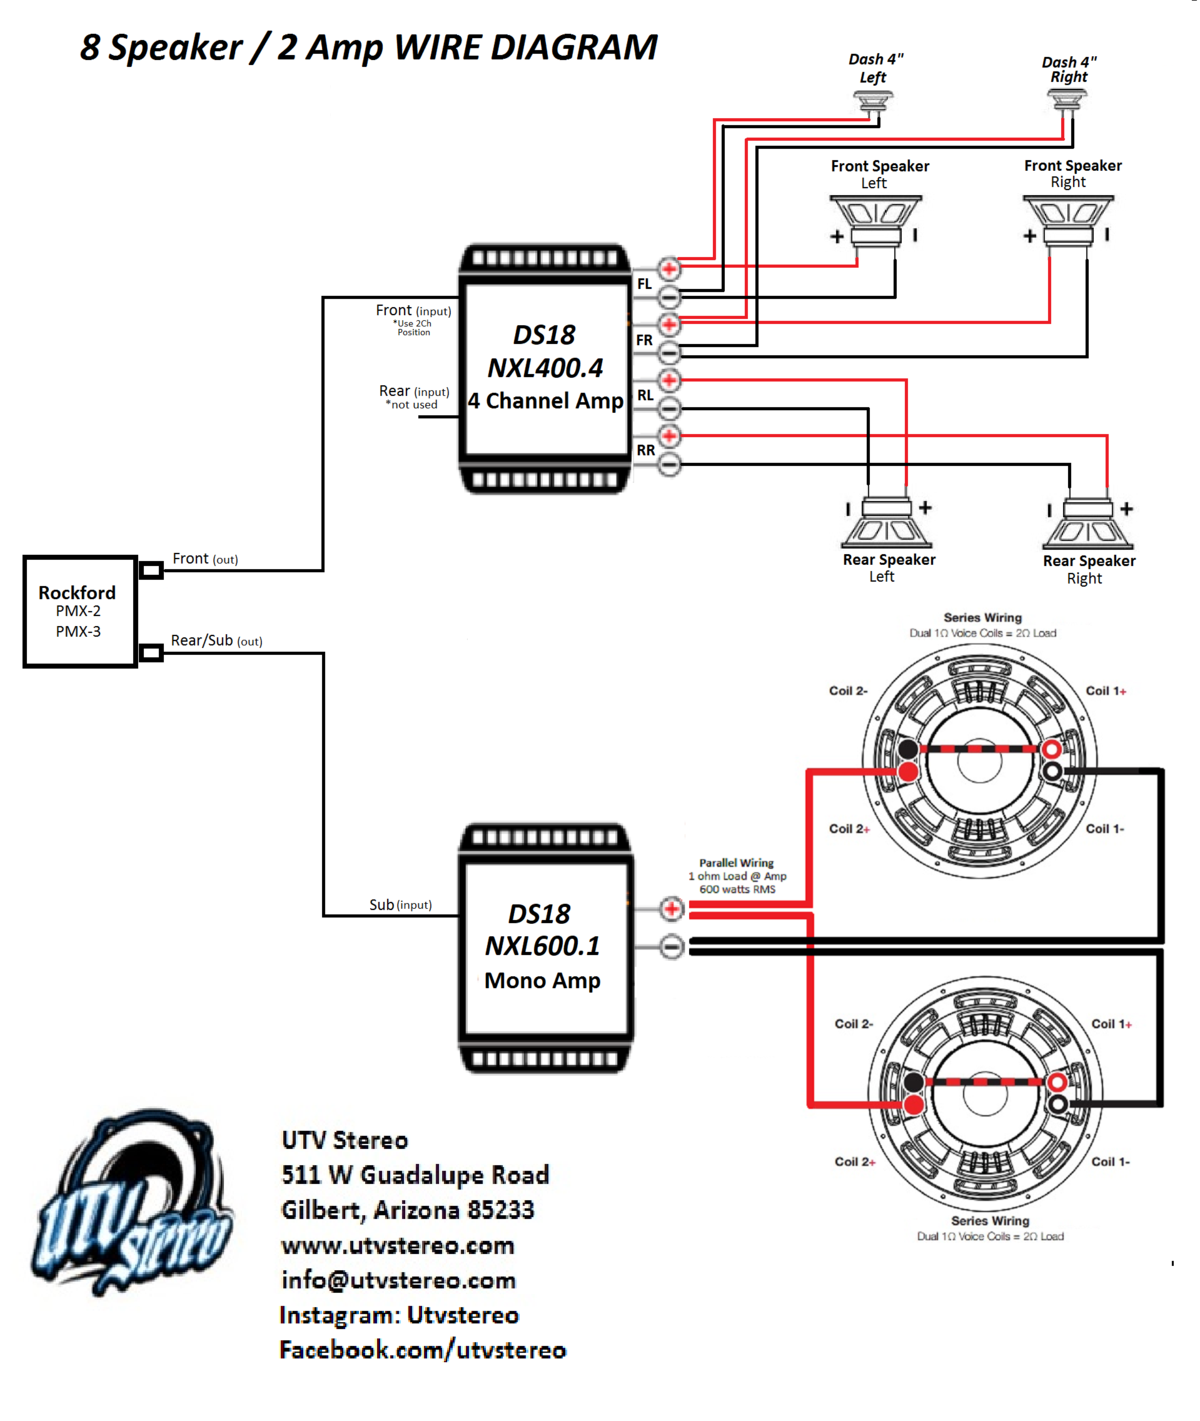 2 Amps 1 Sub Wiring Diagram from cdn.shopify.com